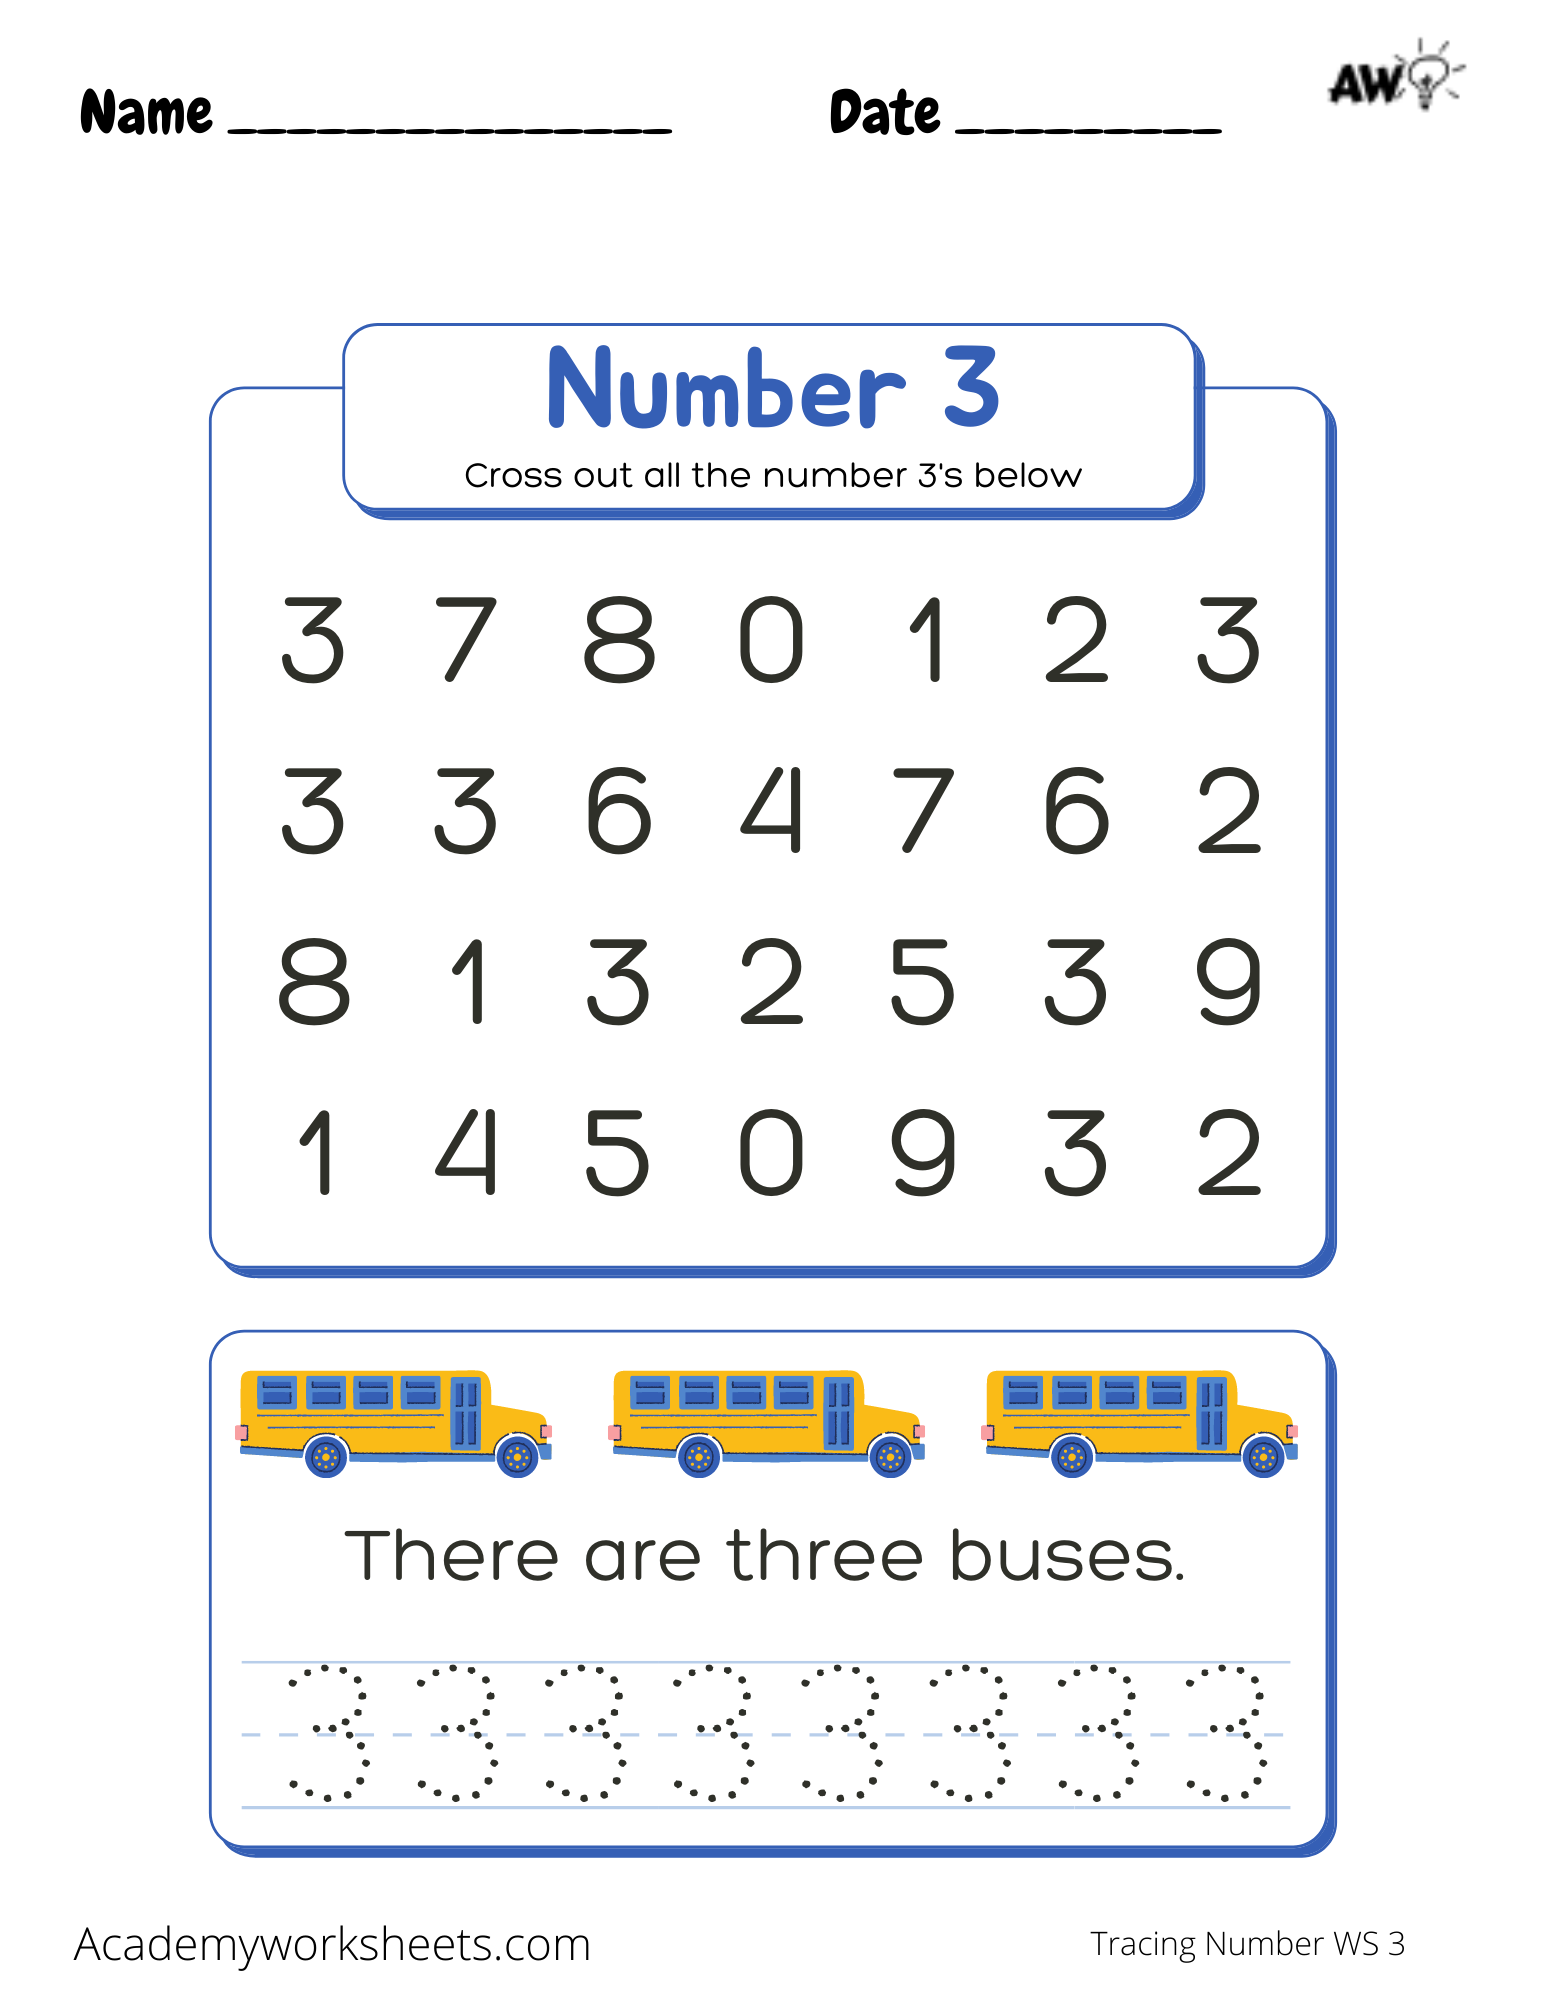 the-number-3-tracing-academy-worksheets